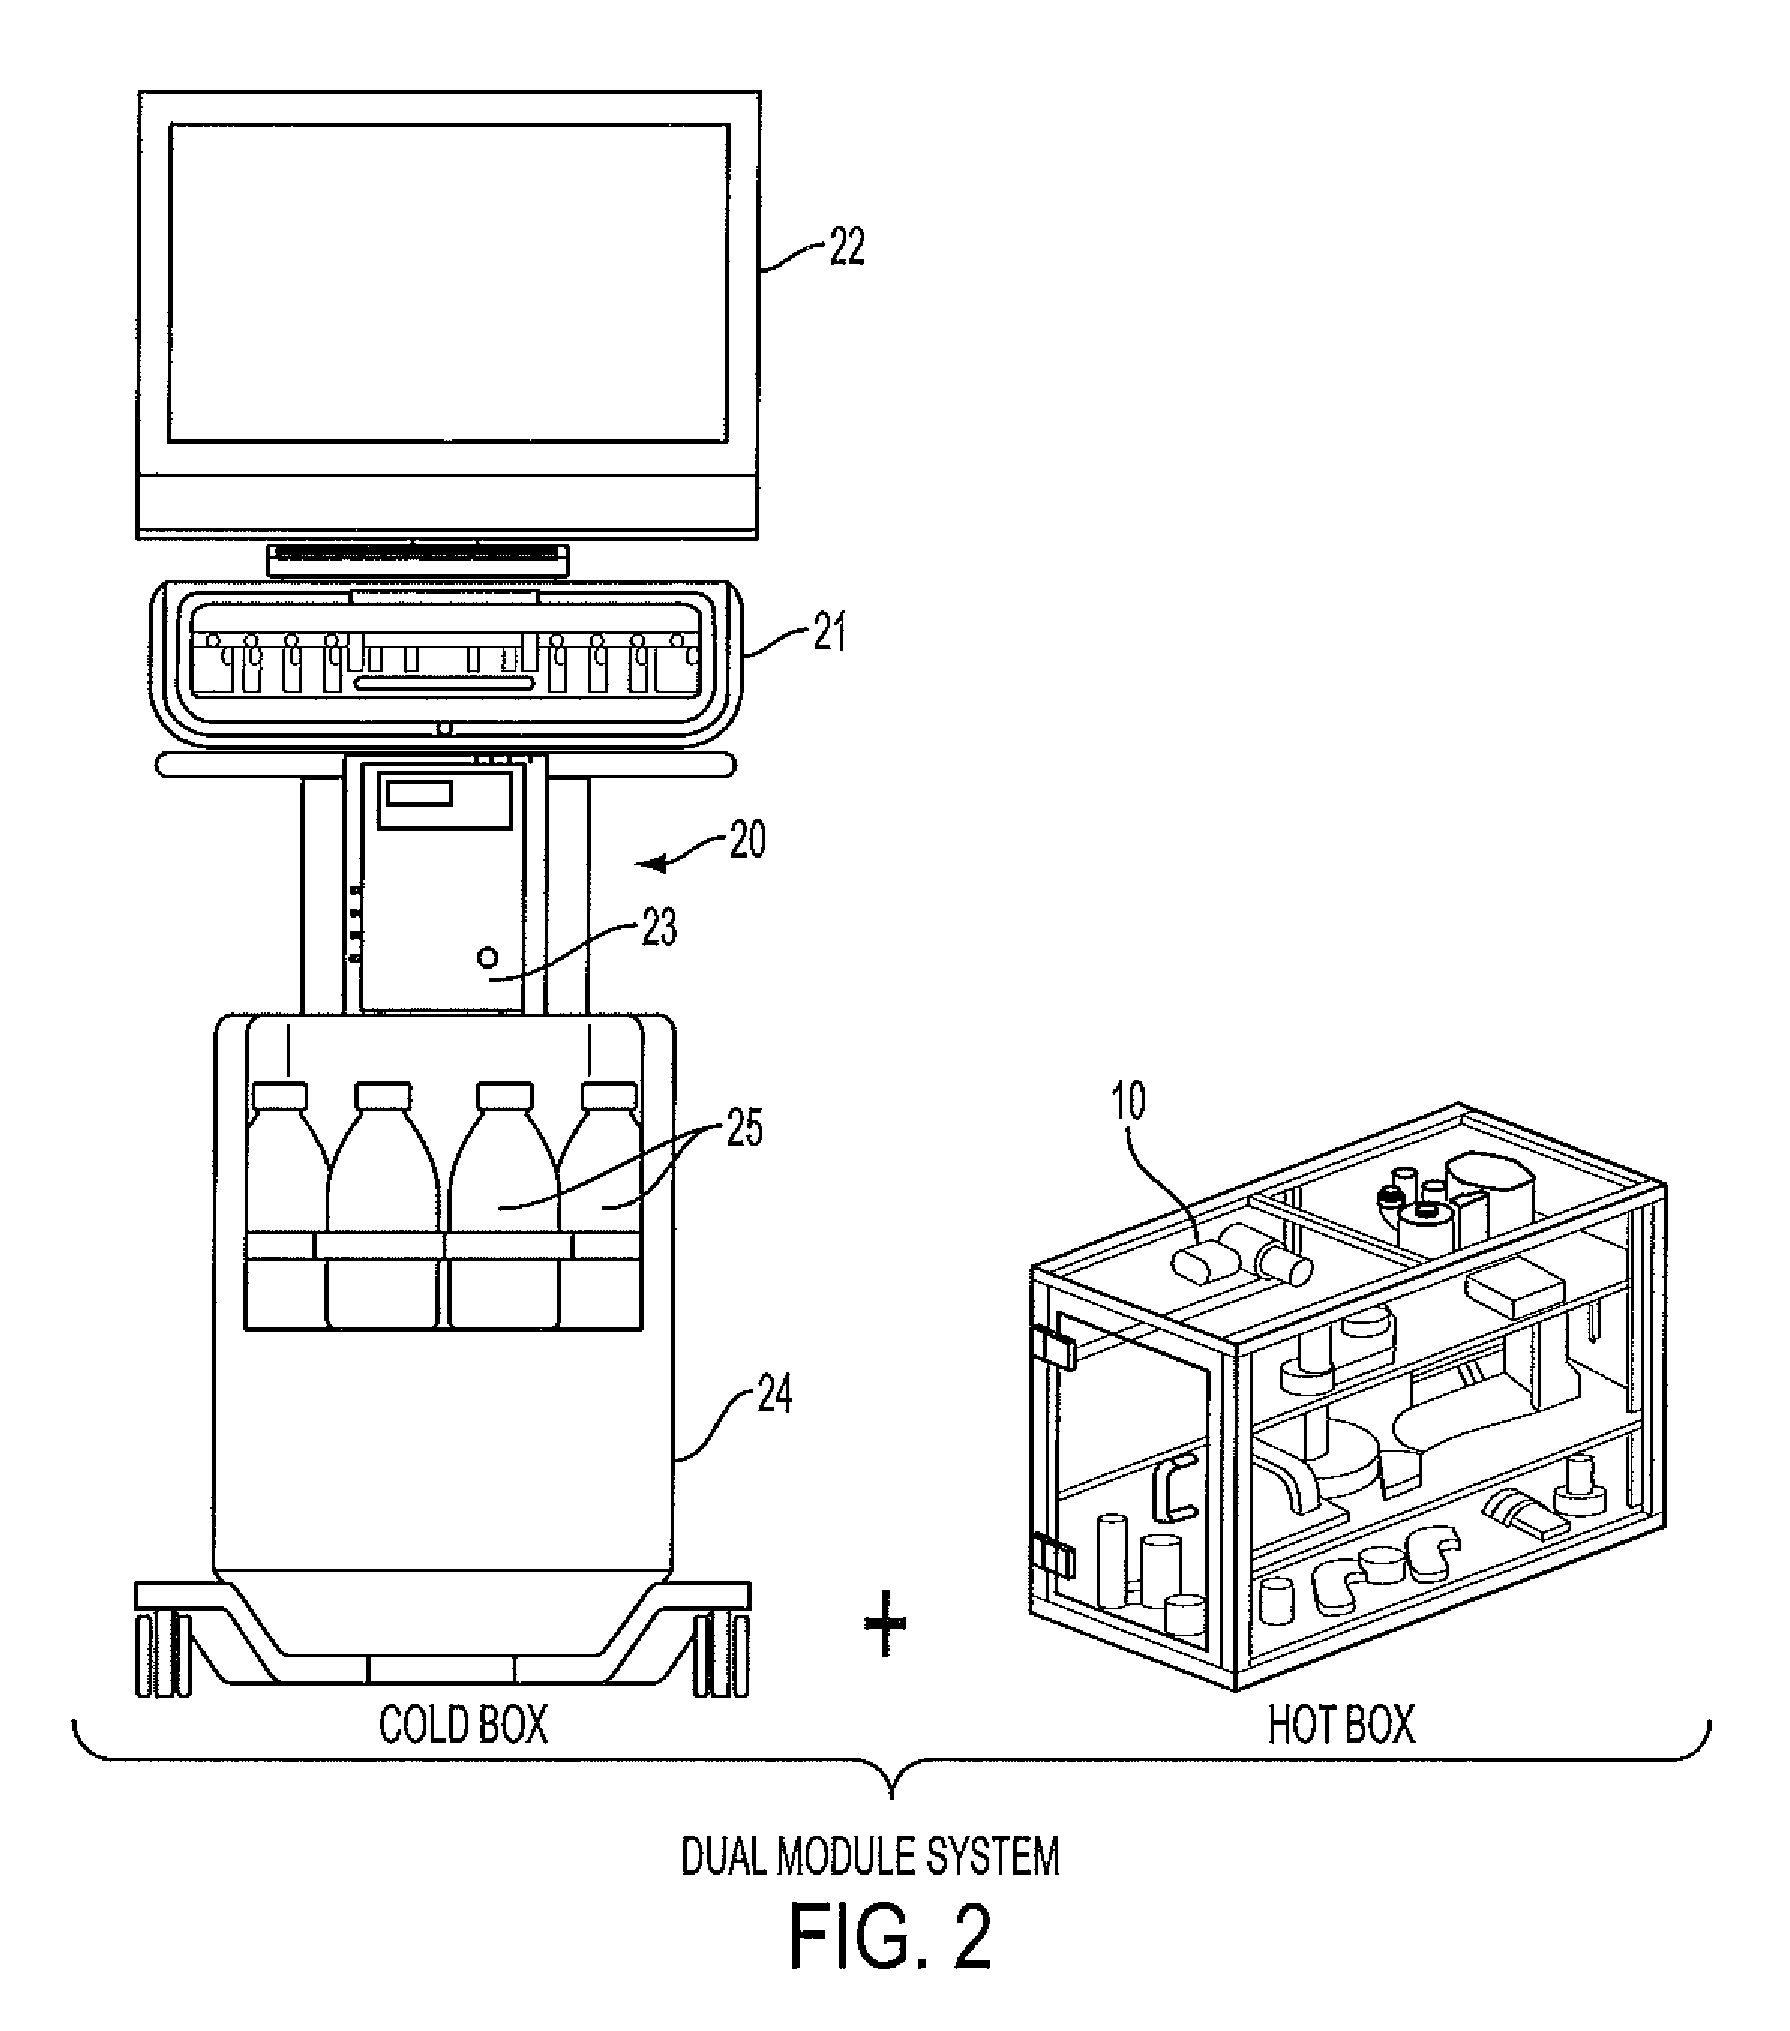 Modular system for radiosynthesis with multi-run capabilities and reduced risk of radiation exposure